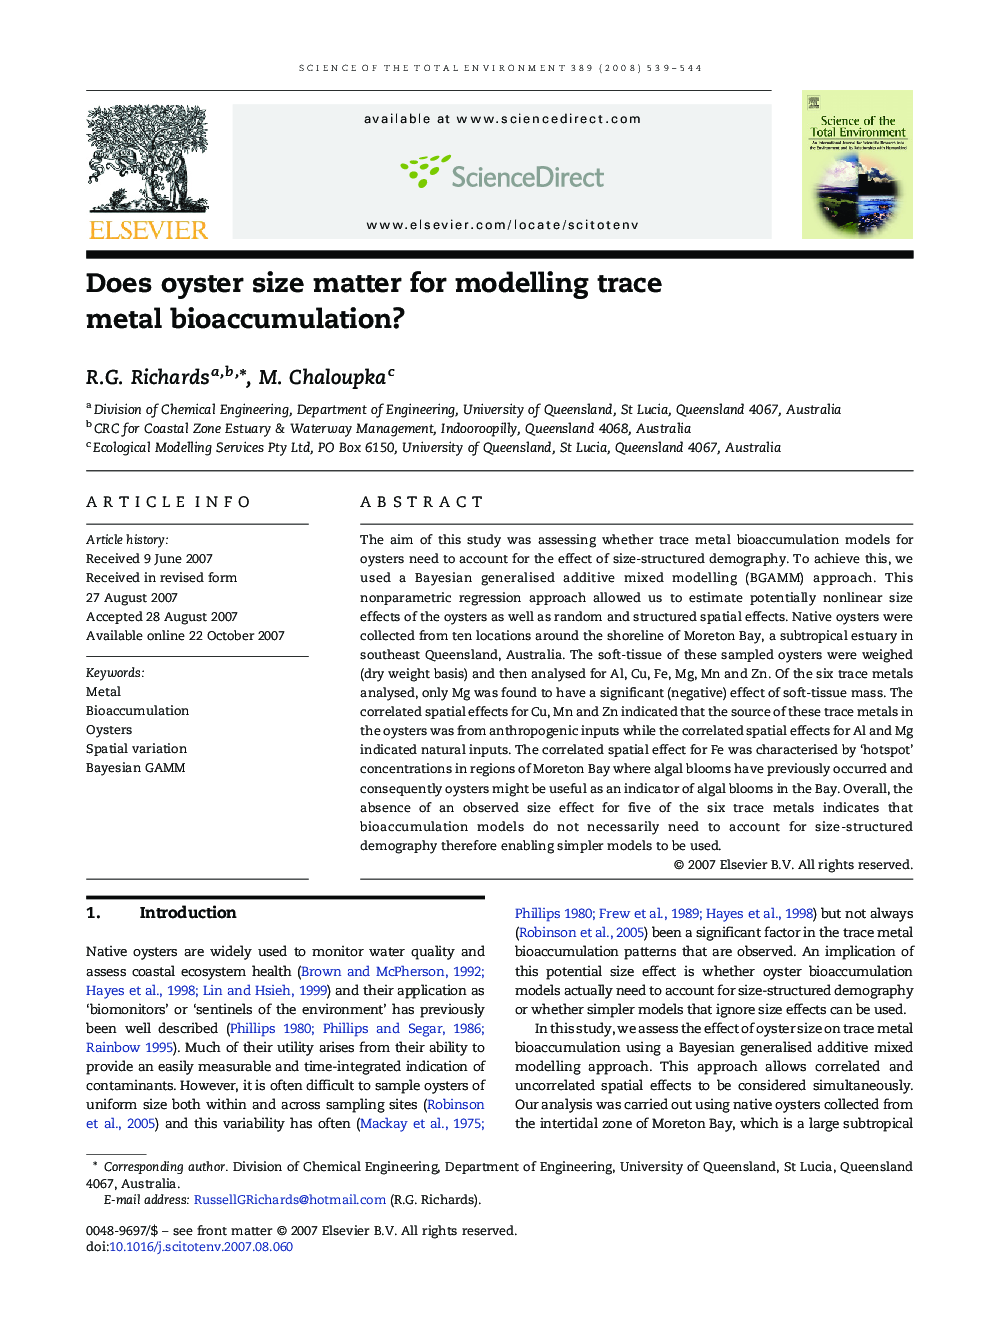 Does oyster size matter for modelling trace metal bioaccumulation?